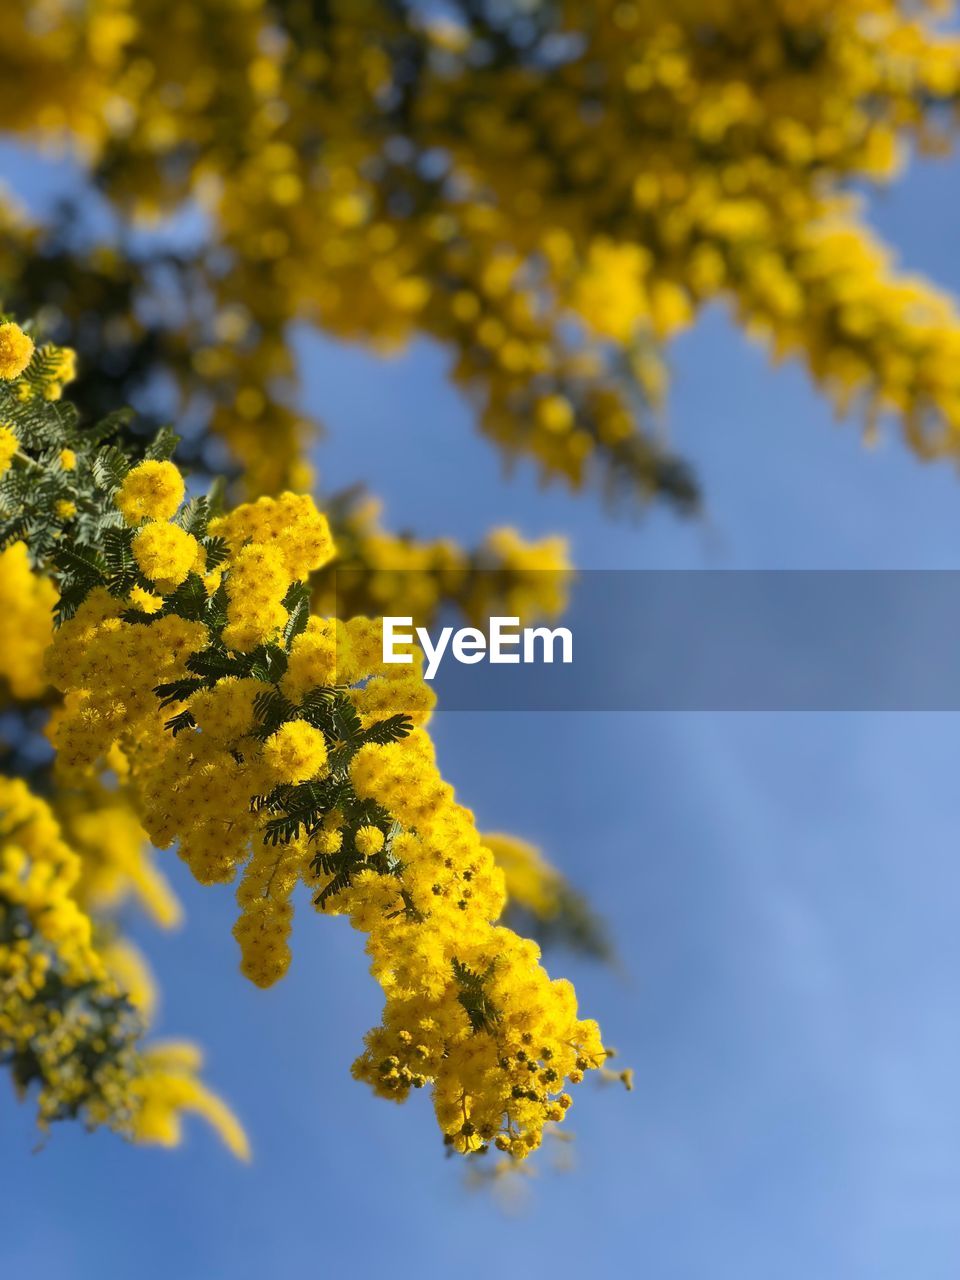 LOW ANGLE VIEW OF YELLOW FLOWERS AGAINST TREE